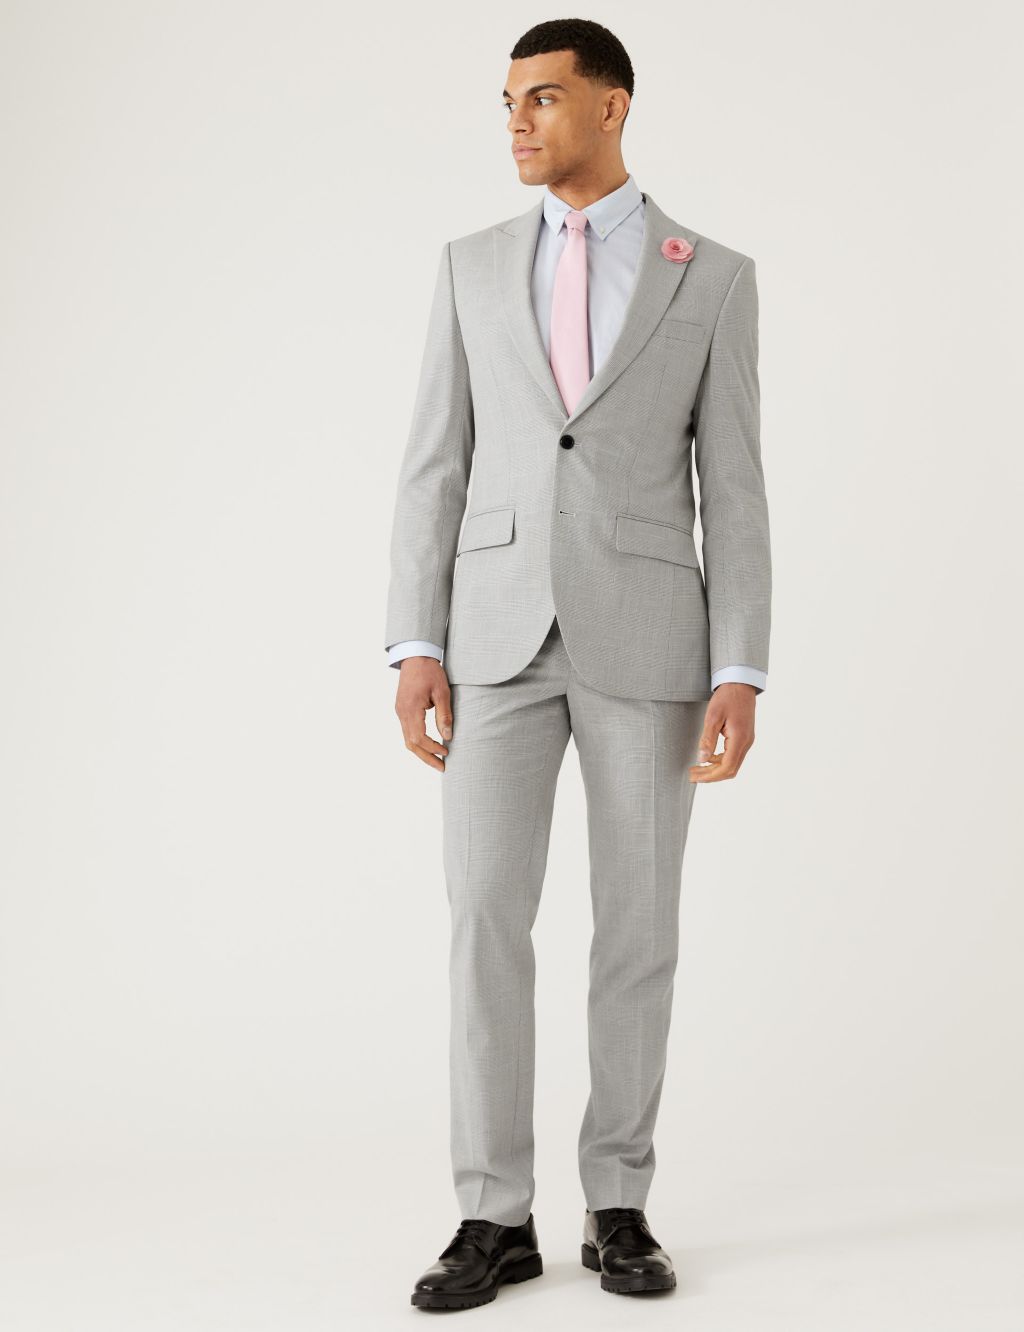 Slim Fit Prince of Wales Check Suit Jacket image 6